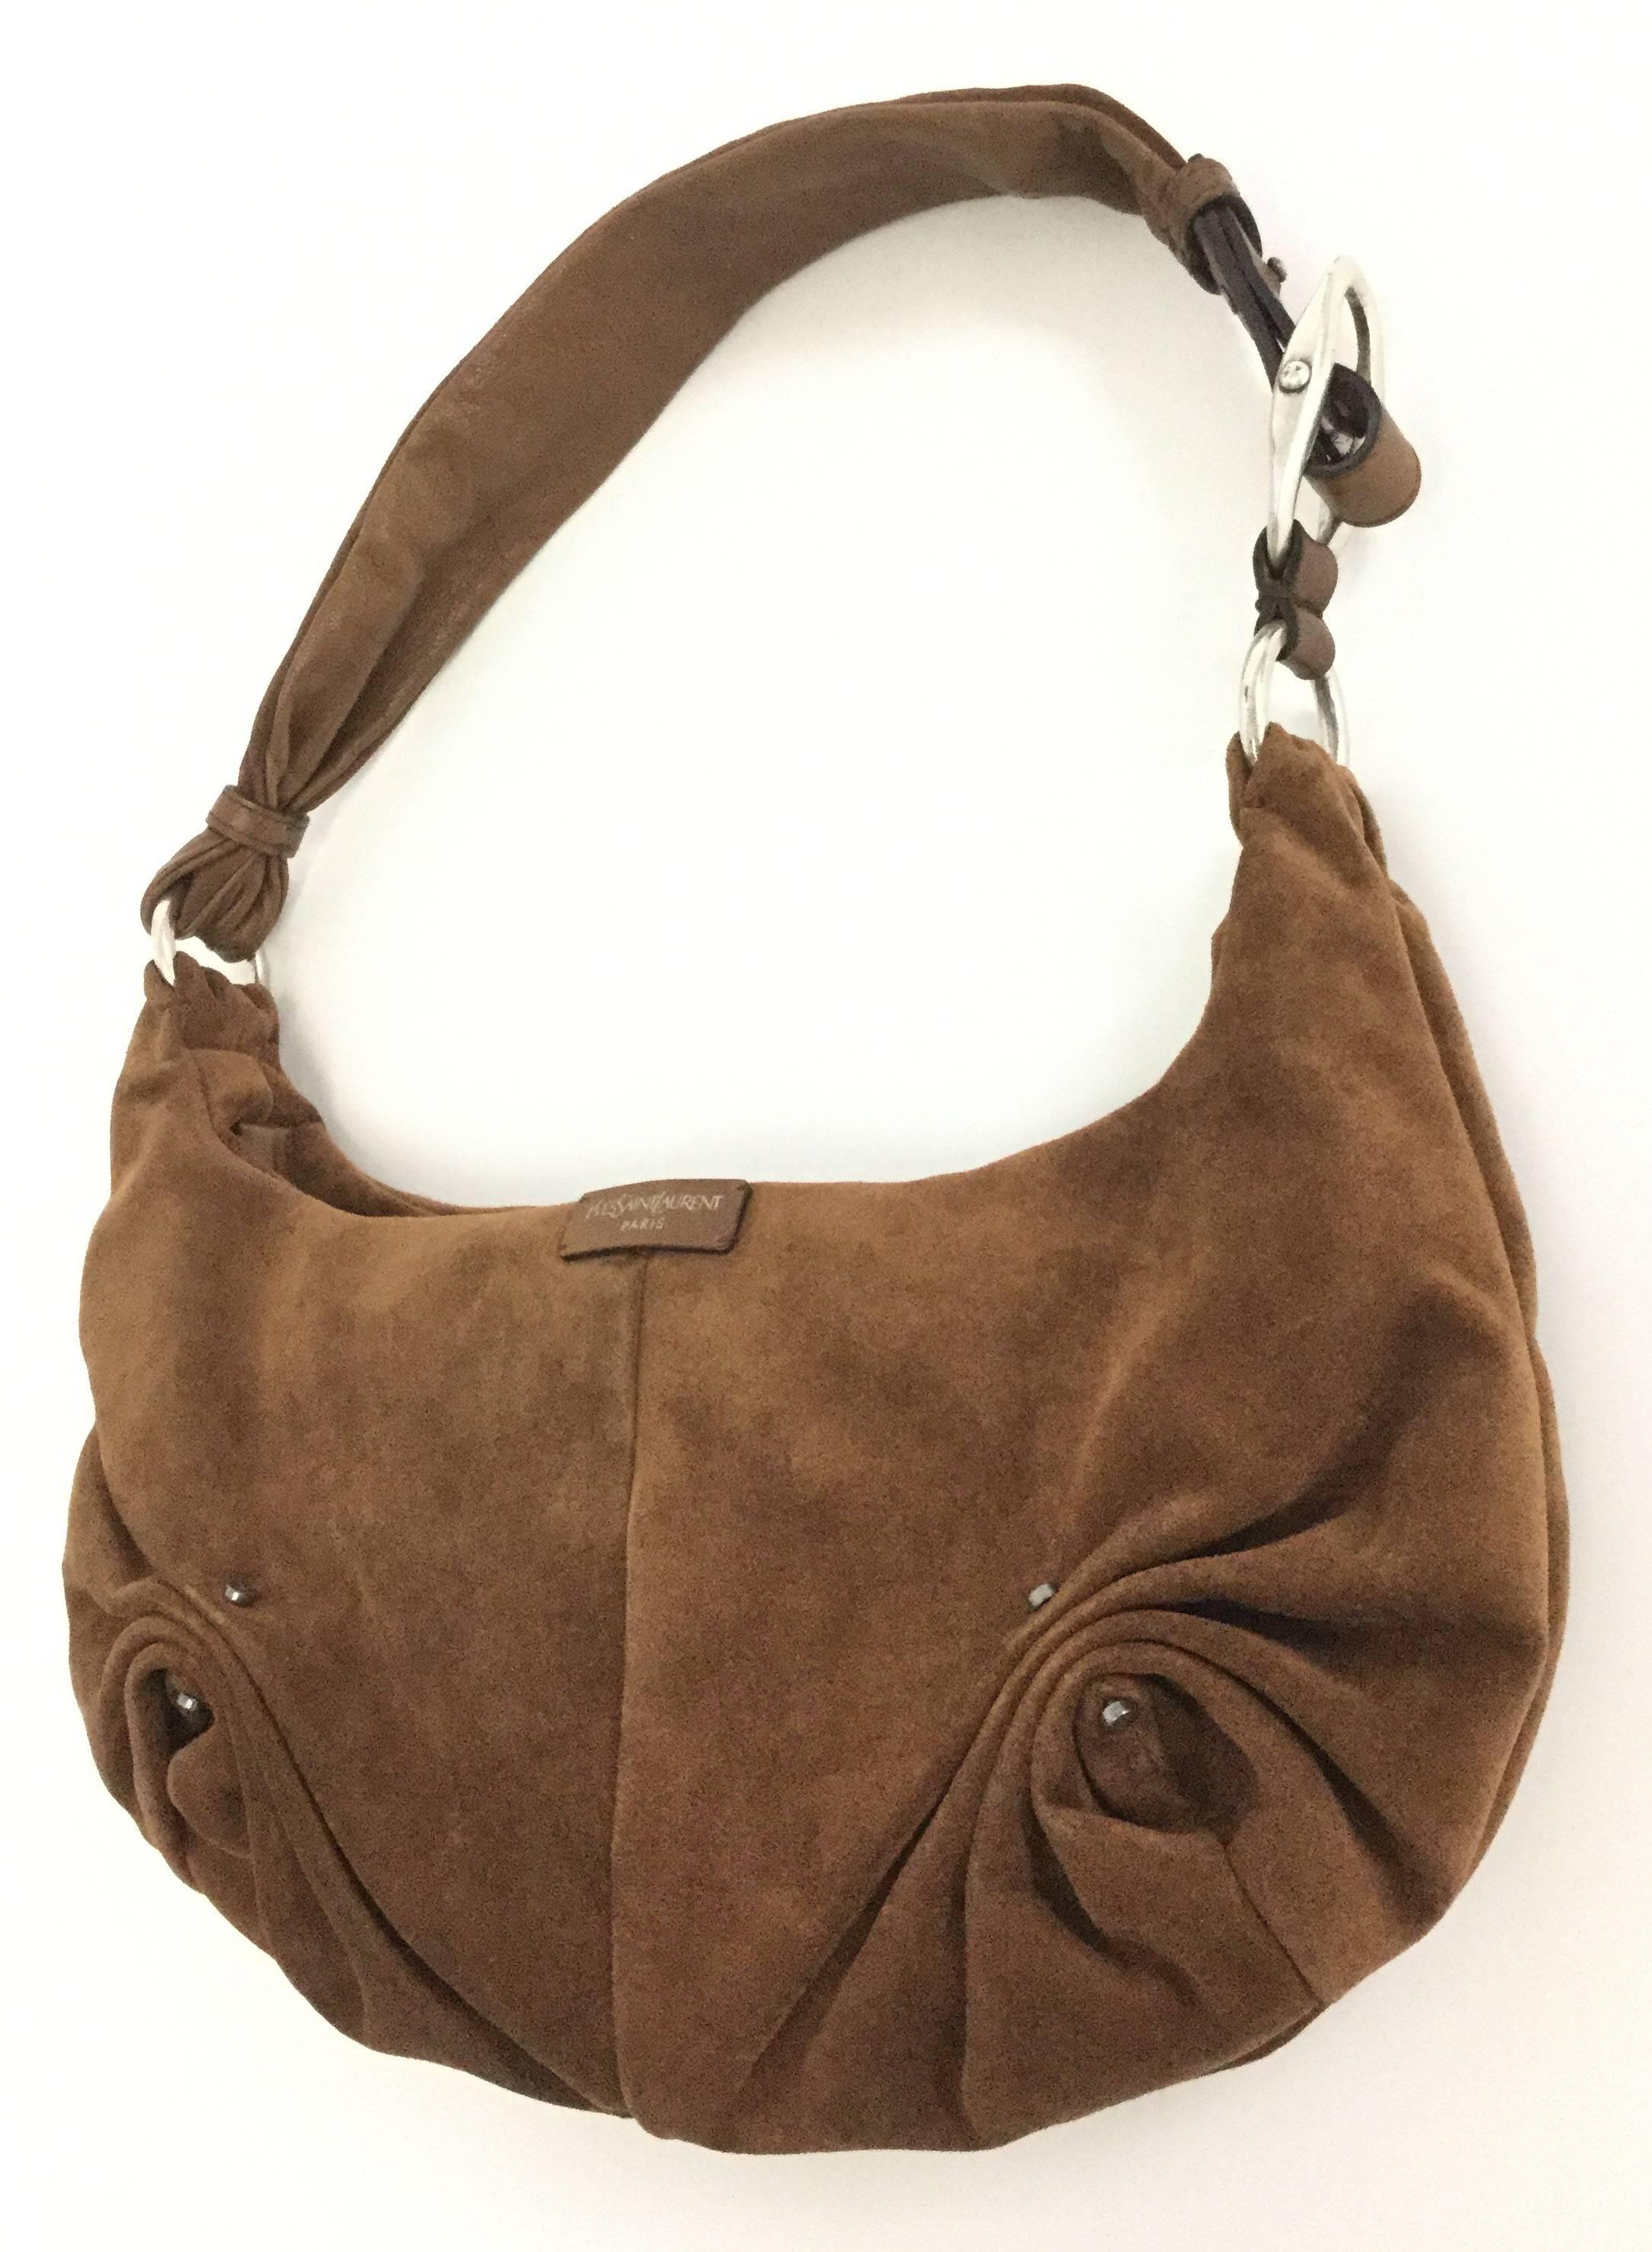 2004 Yves Saint Laurent Mamounia Brown Lambskin Shoulder Bag In Good Condition For Sale In Houston, TX